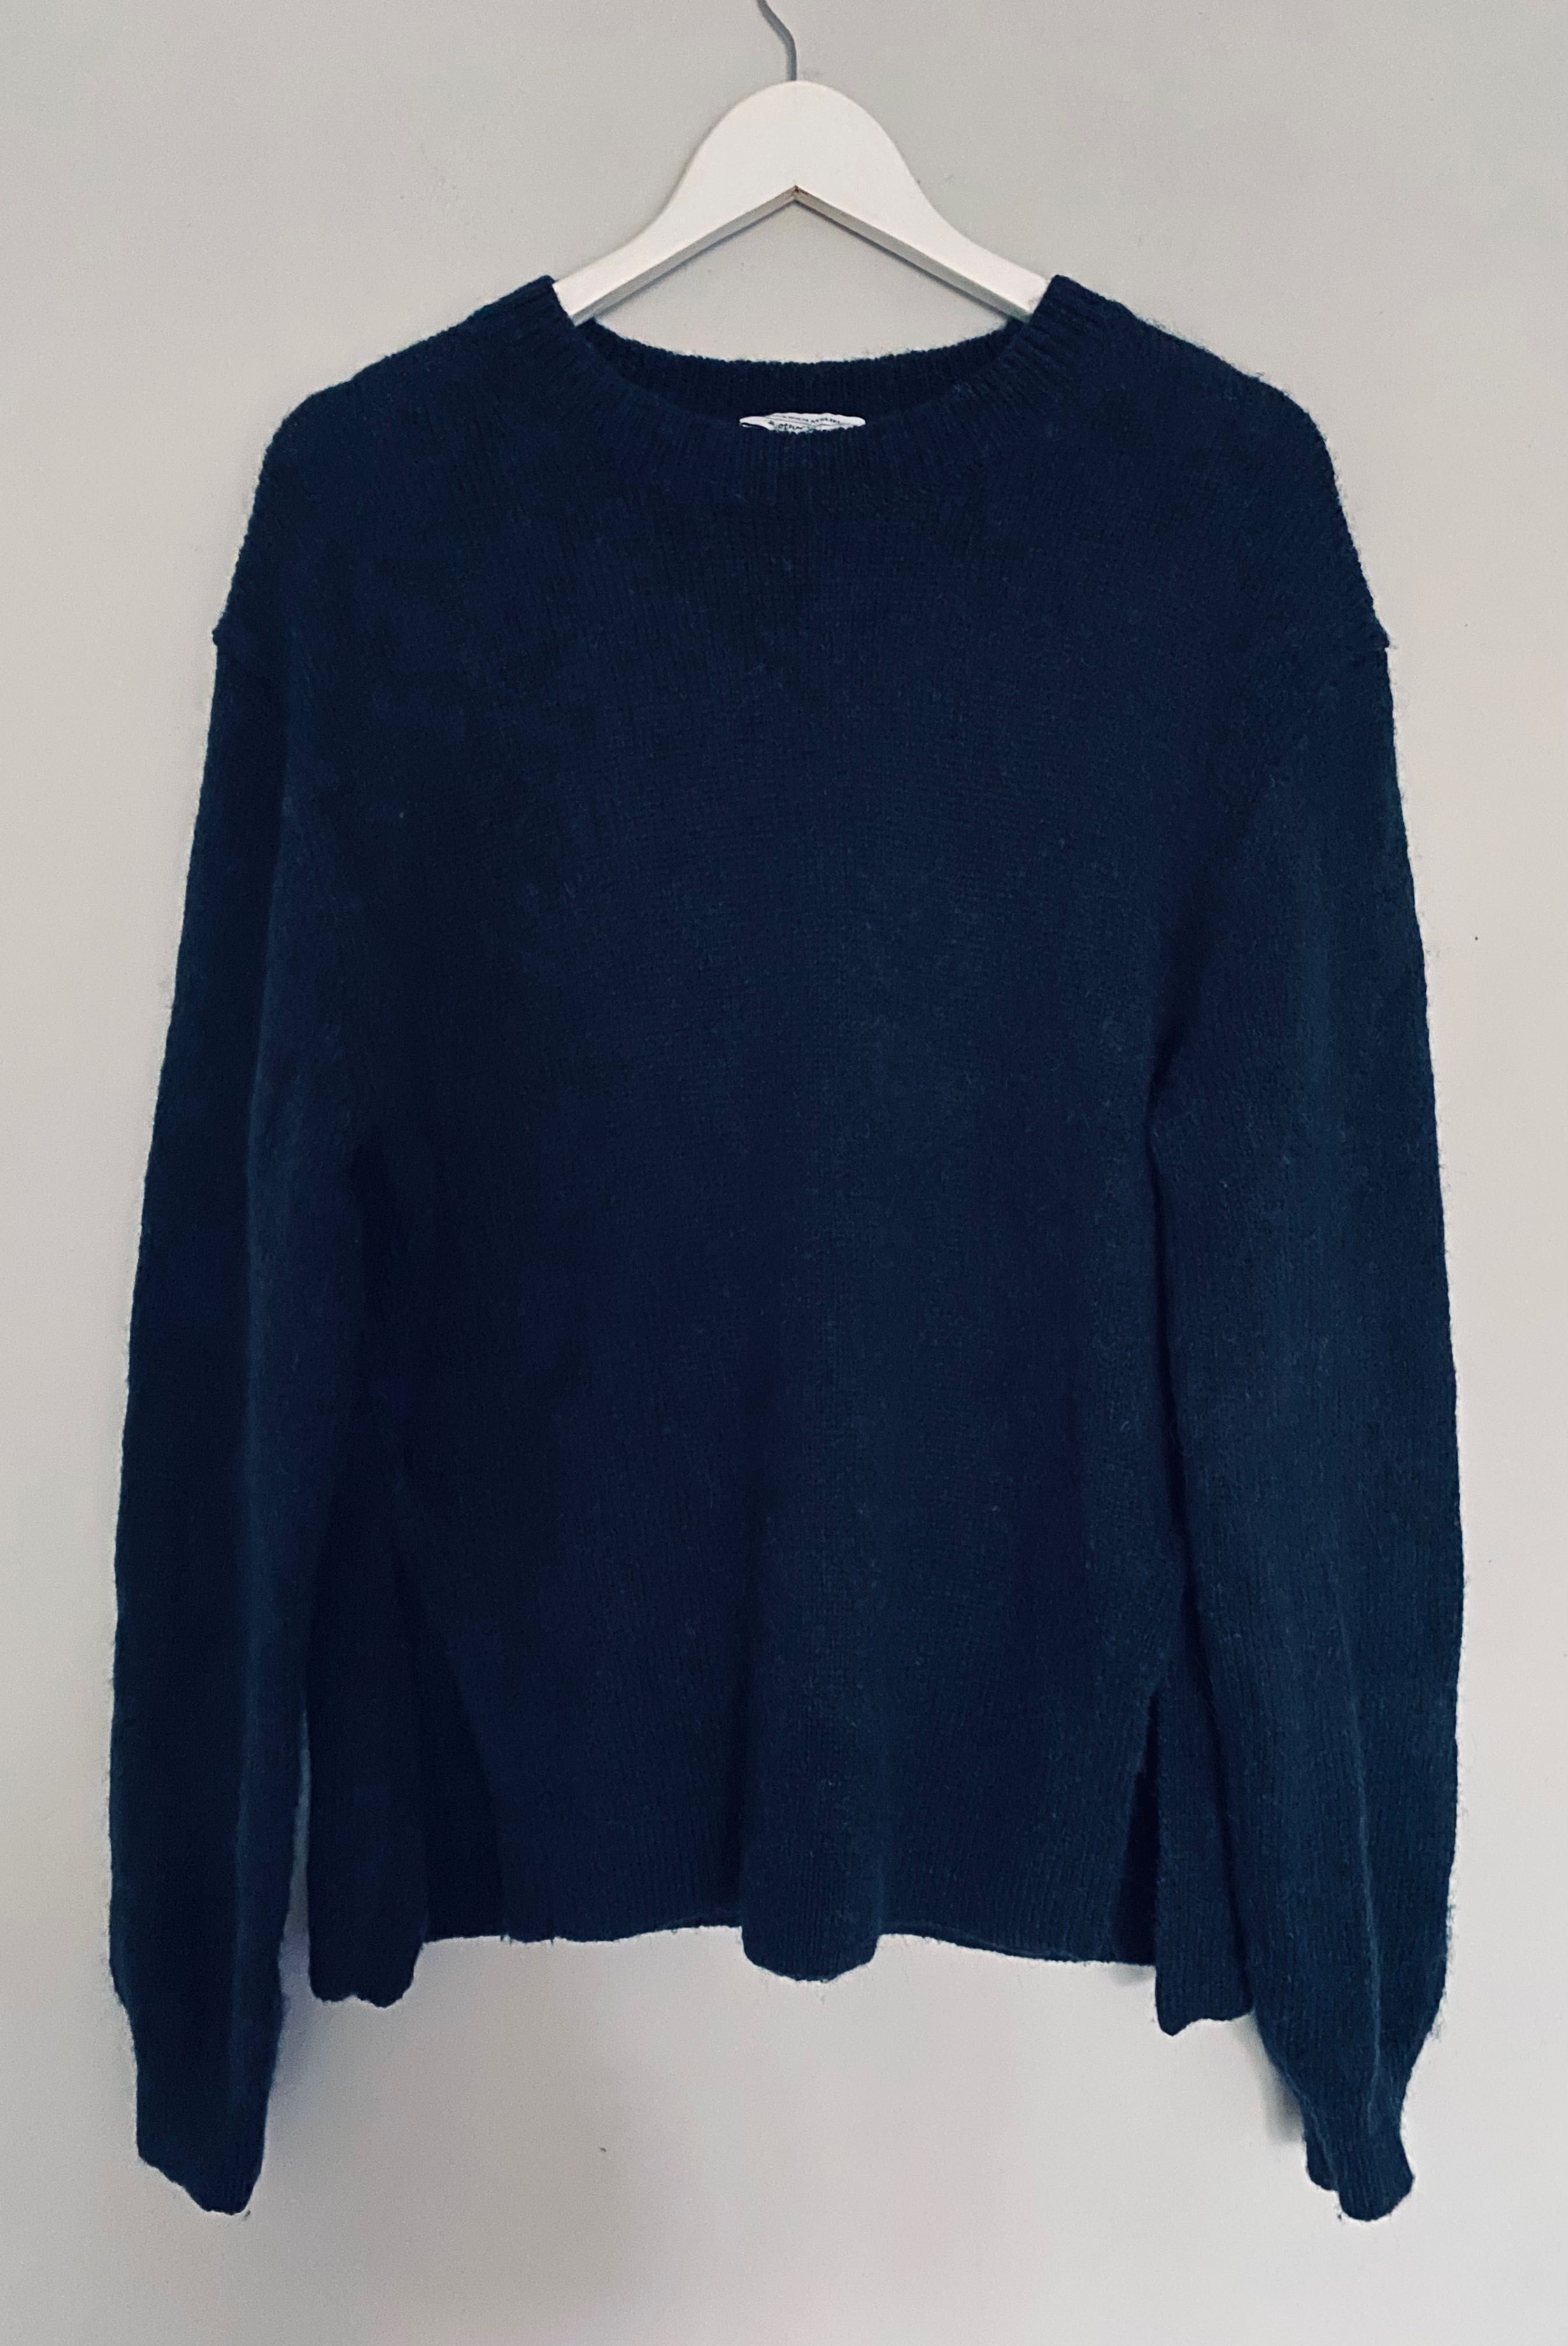 Sweter & Other Stories, rozmiar M, oversize